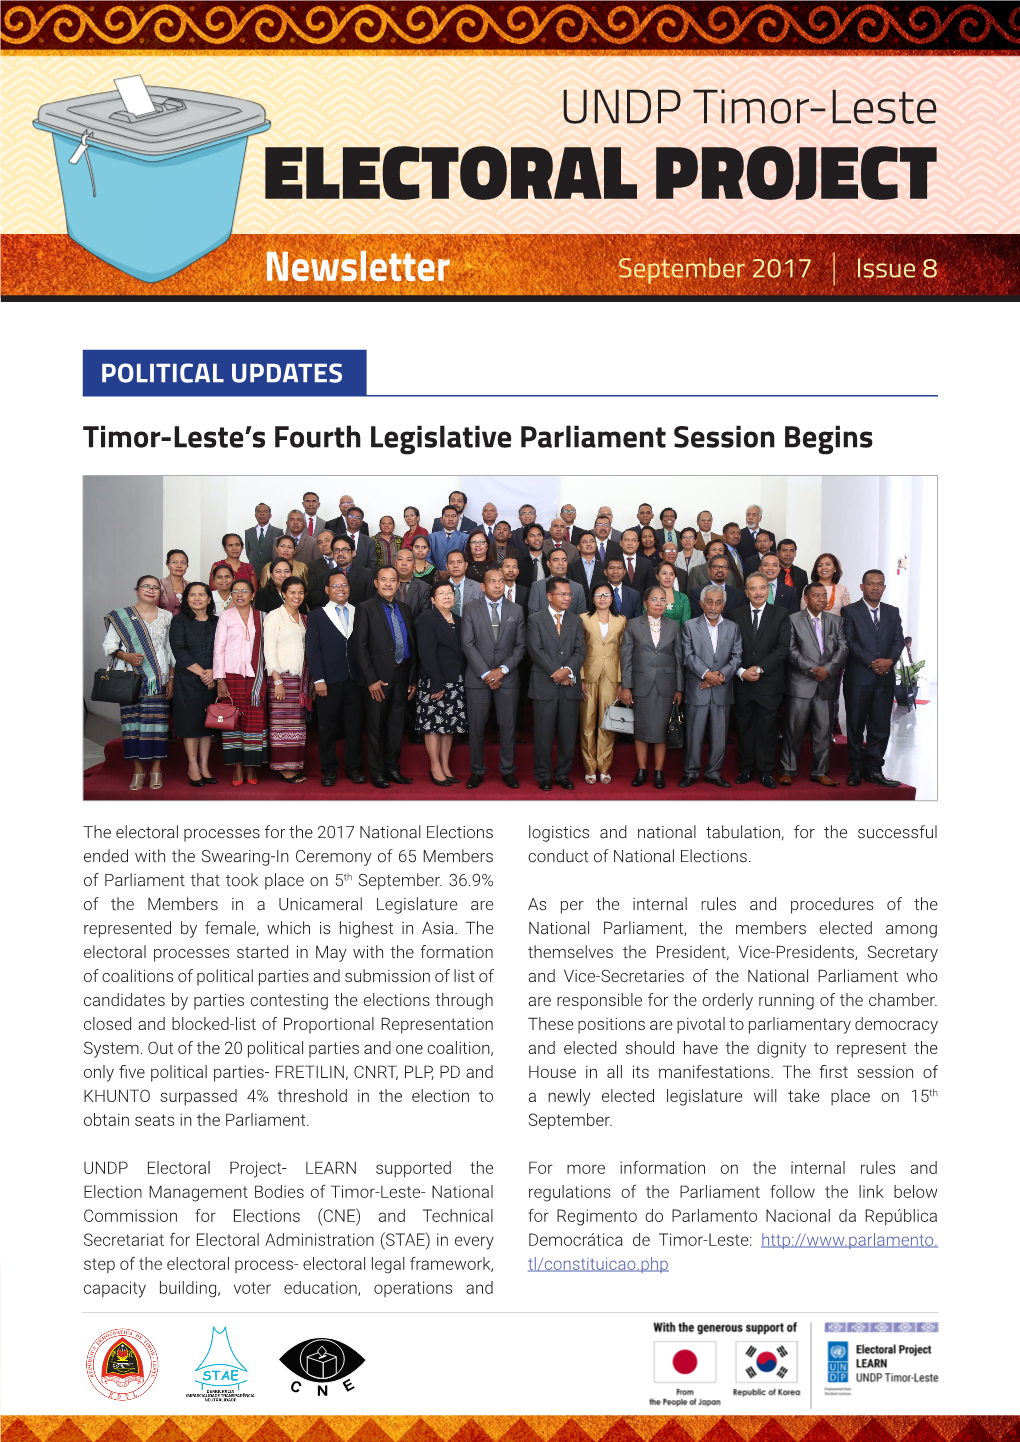 ELECTORAL PROJECT Newsletter September 2017 | Issue 8